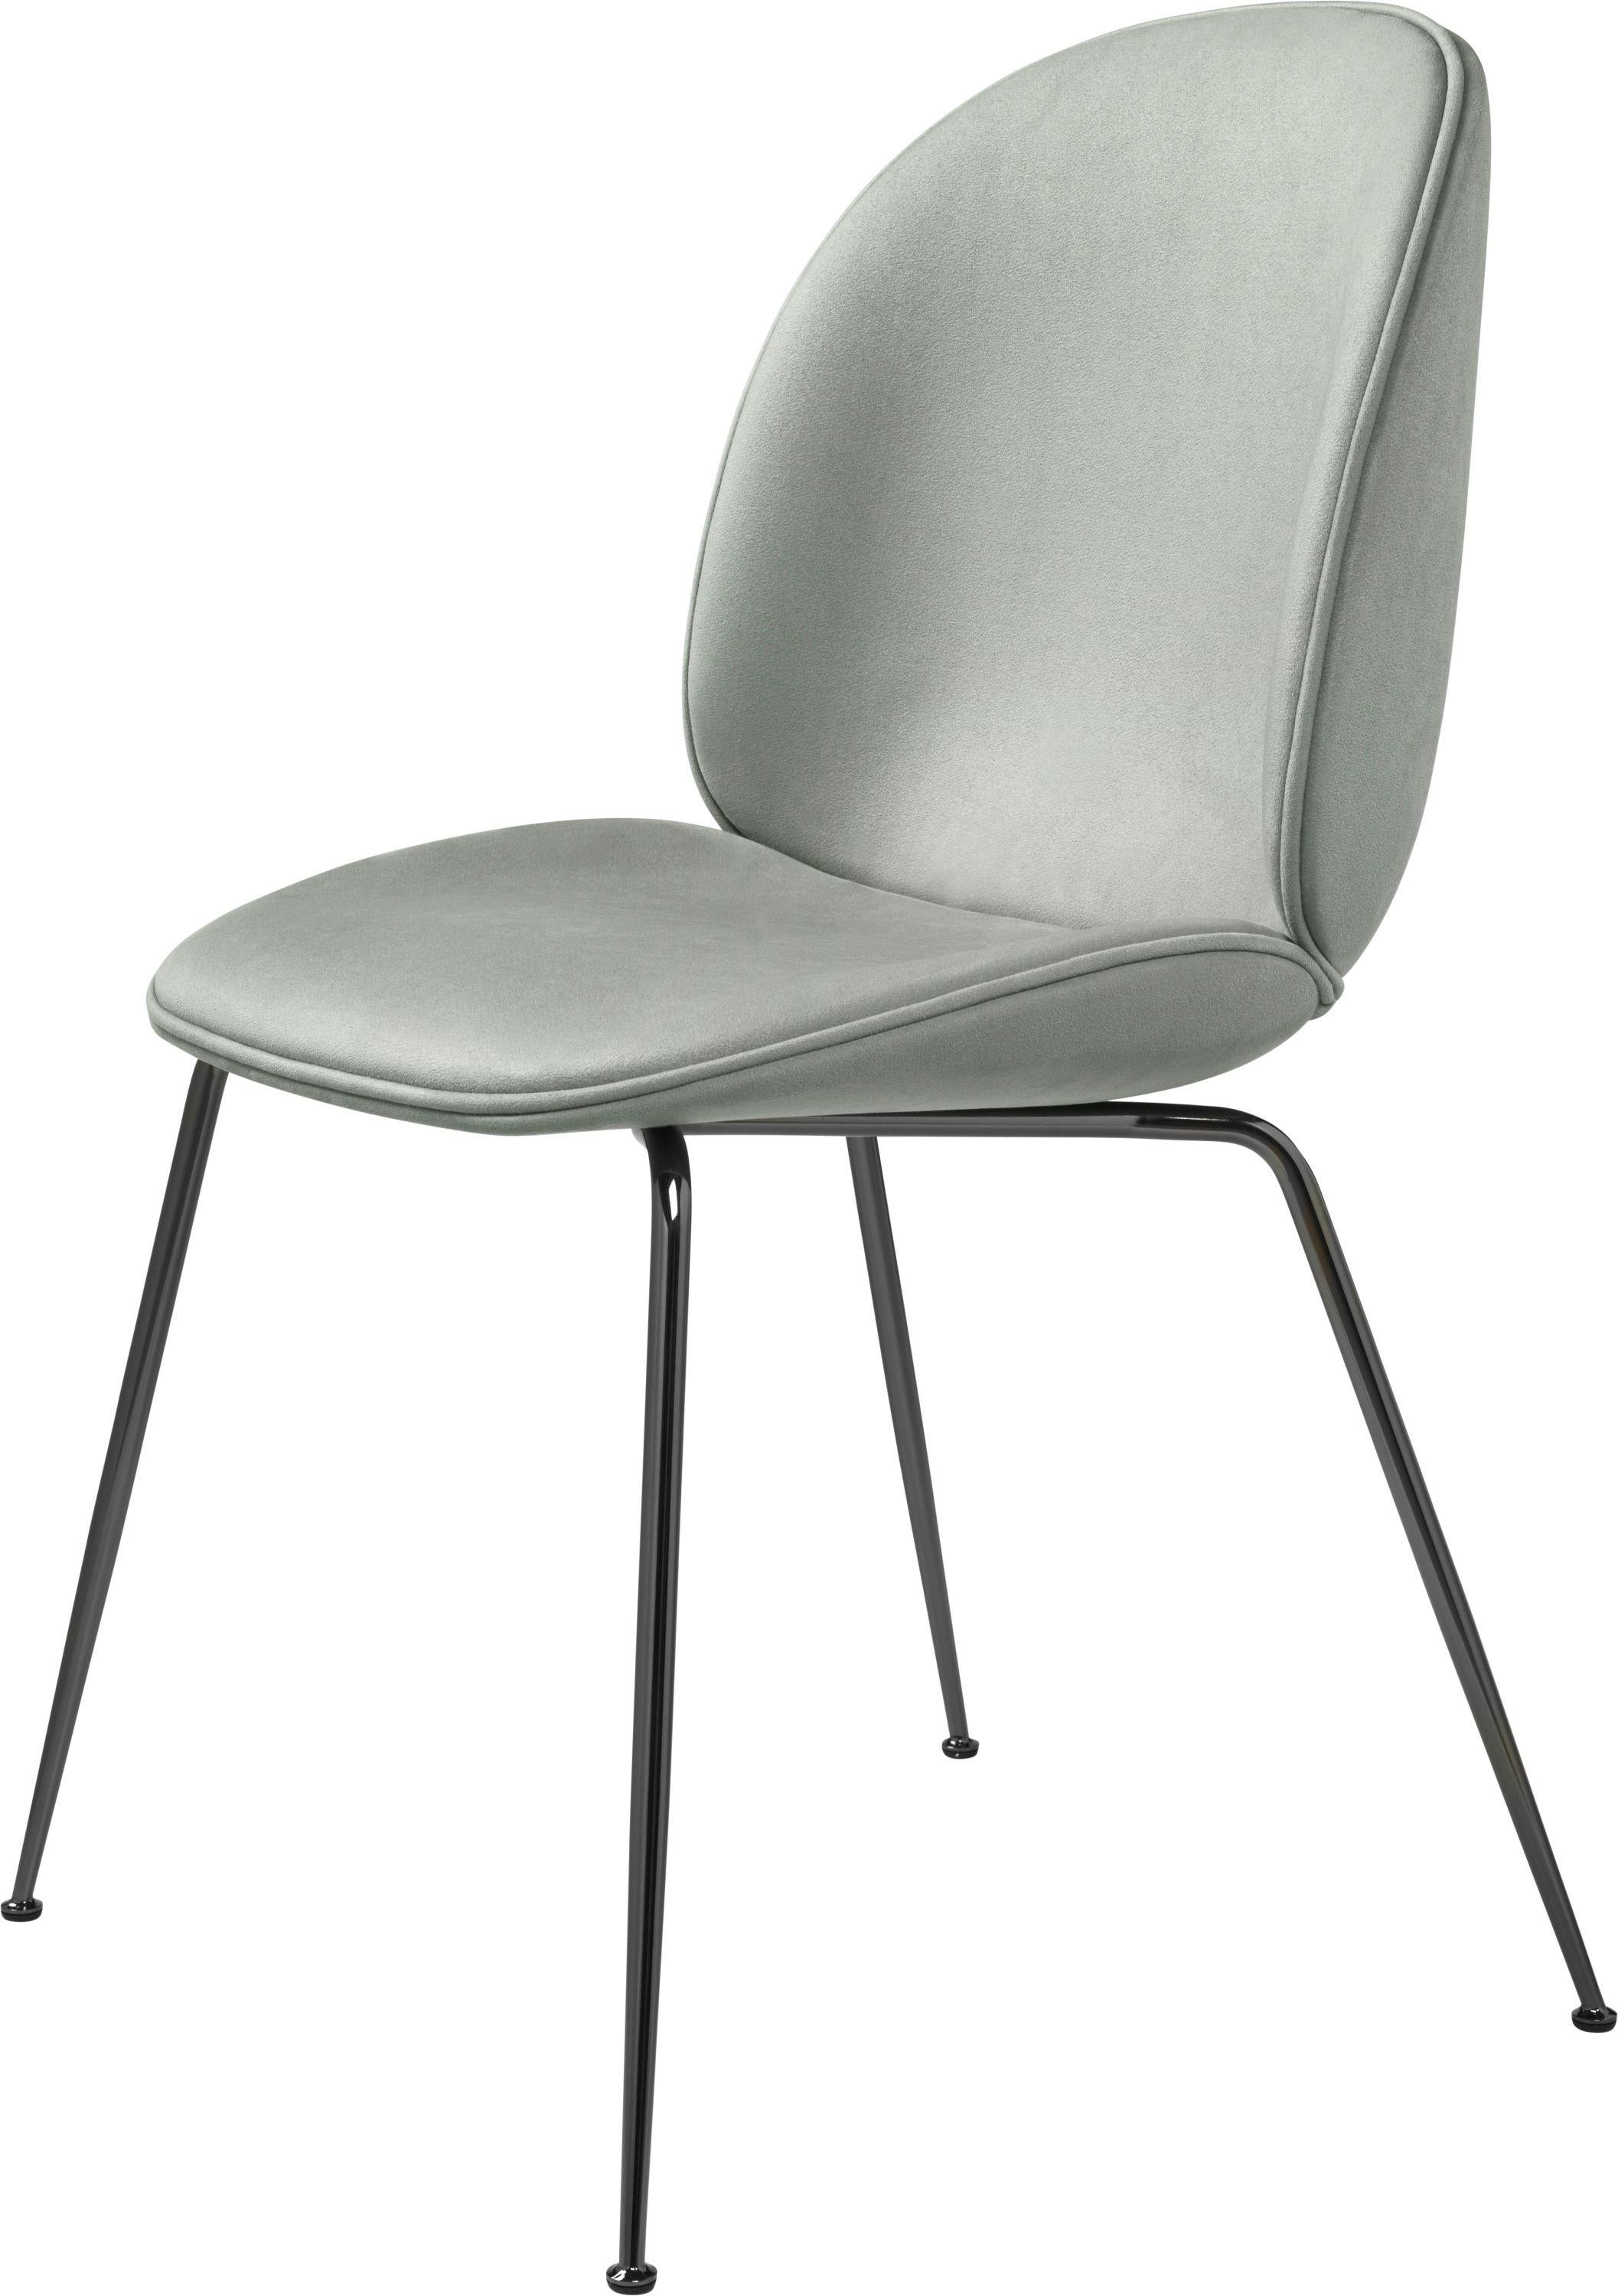 Metal GamFratesi 'Beetle' Dining Chair in Blue with Conic Base